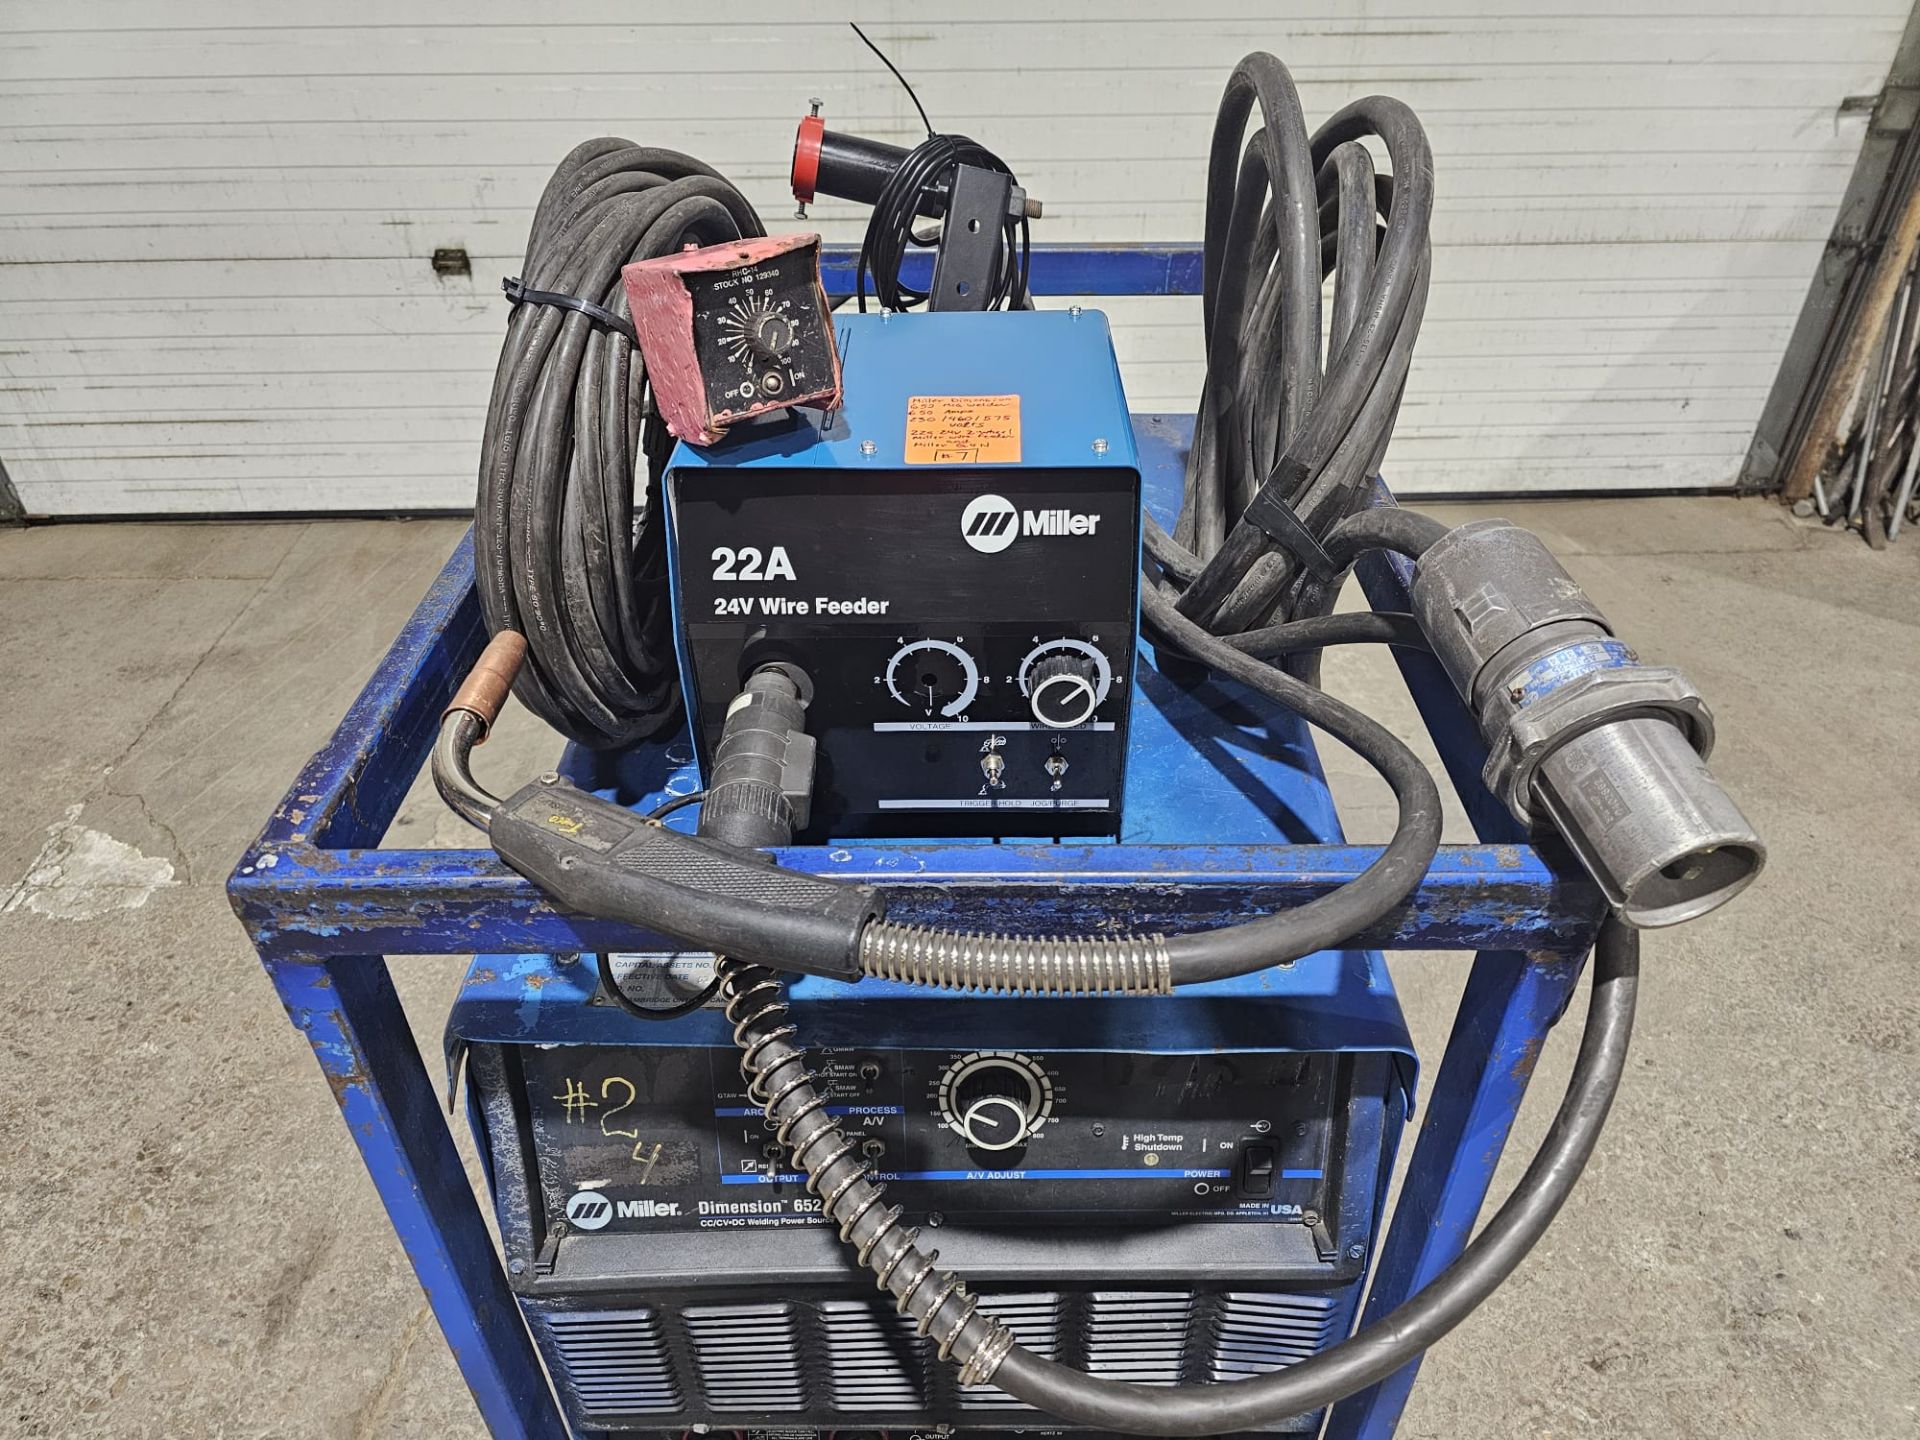 Miller Dimension 652 Mig Welder 650 Amp Mig Tig Stick Multi Process Power Source with 22A Wire - Image 7 of 10